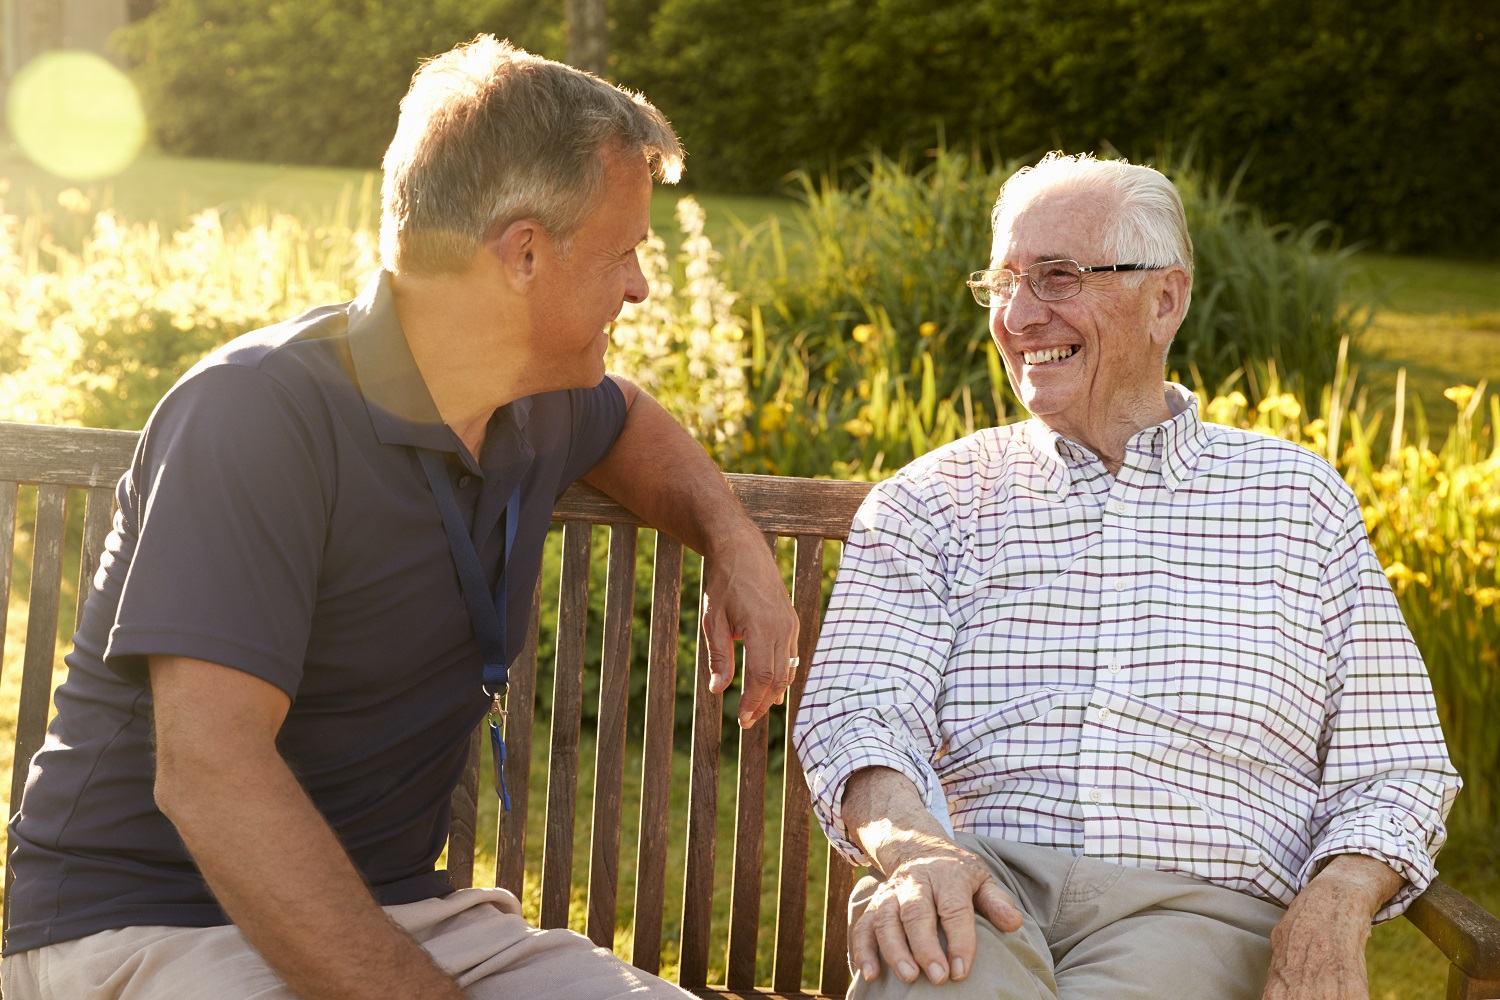 A Brief Guide to Common Types of Elder Care